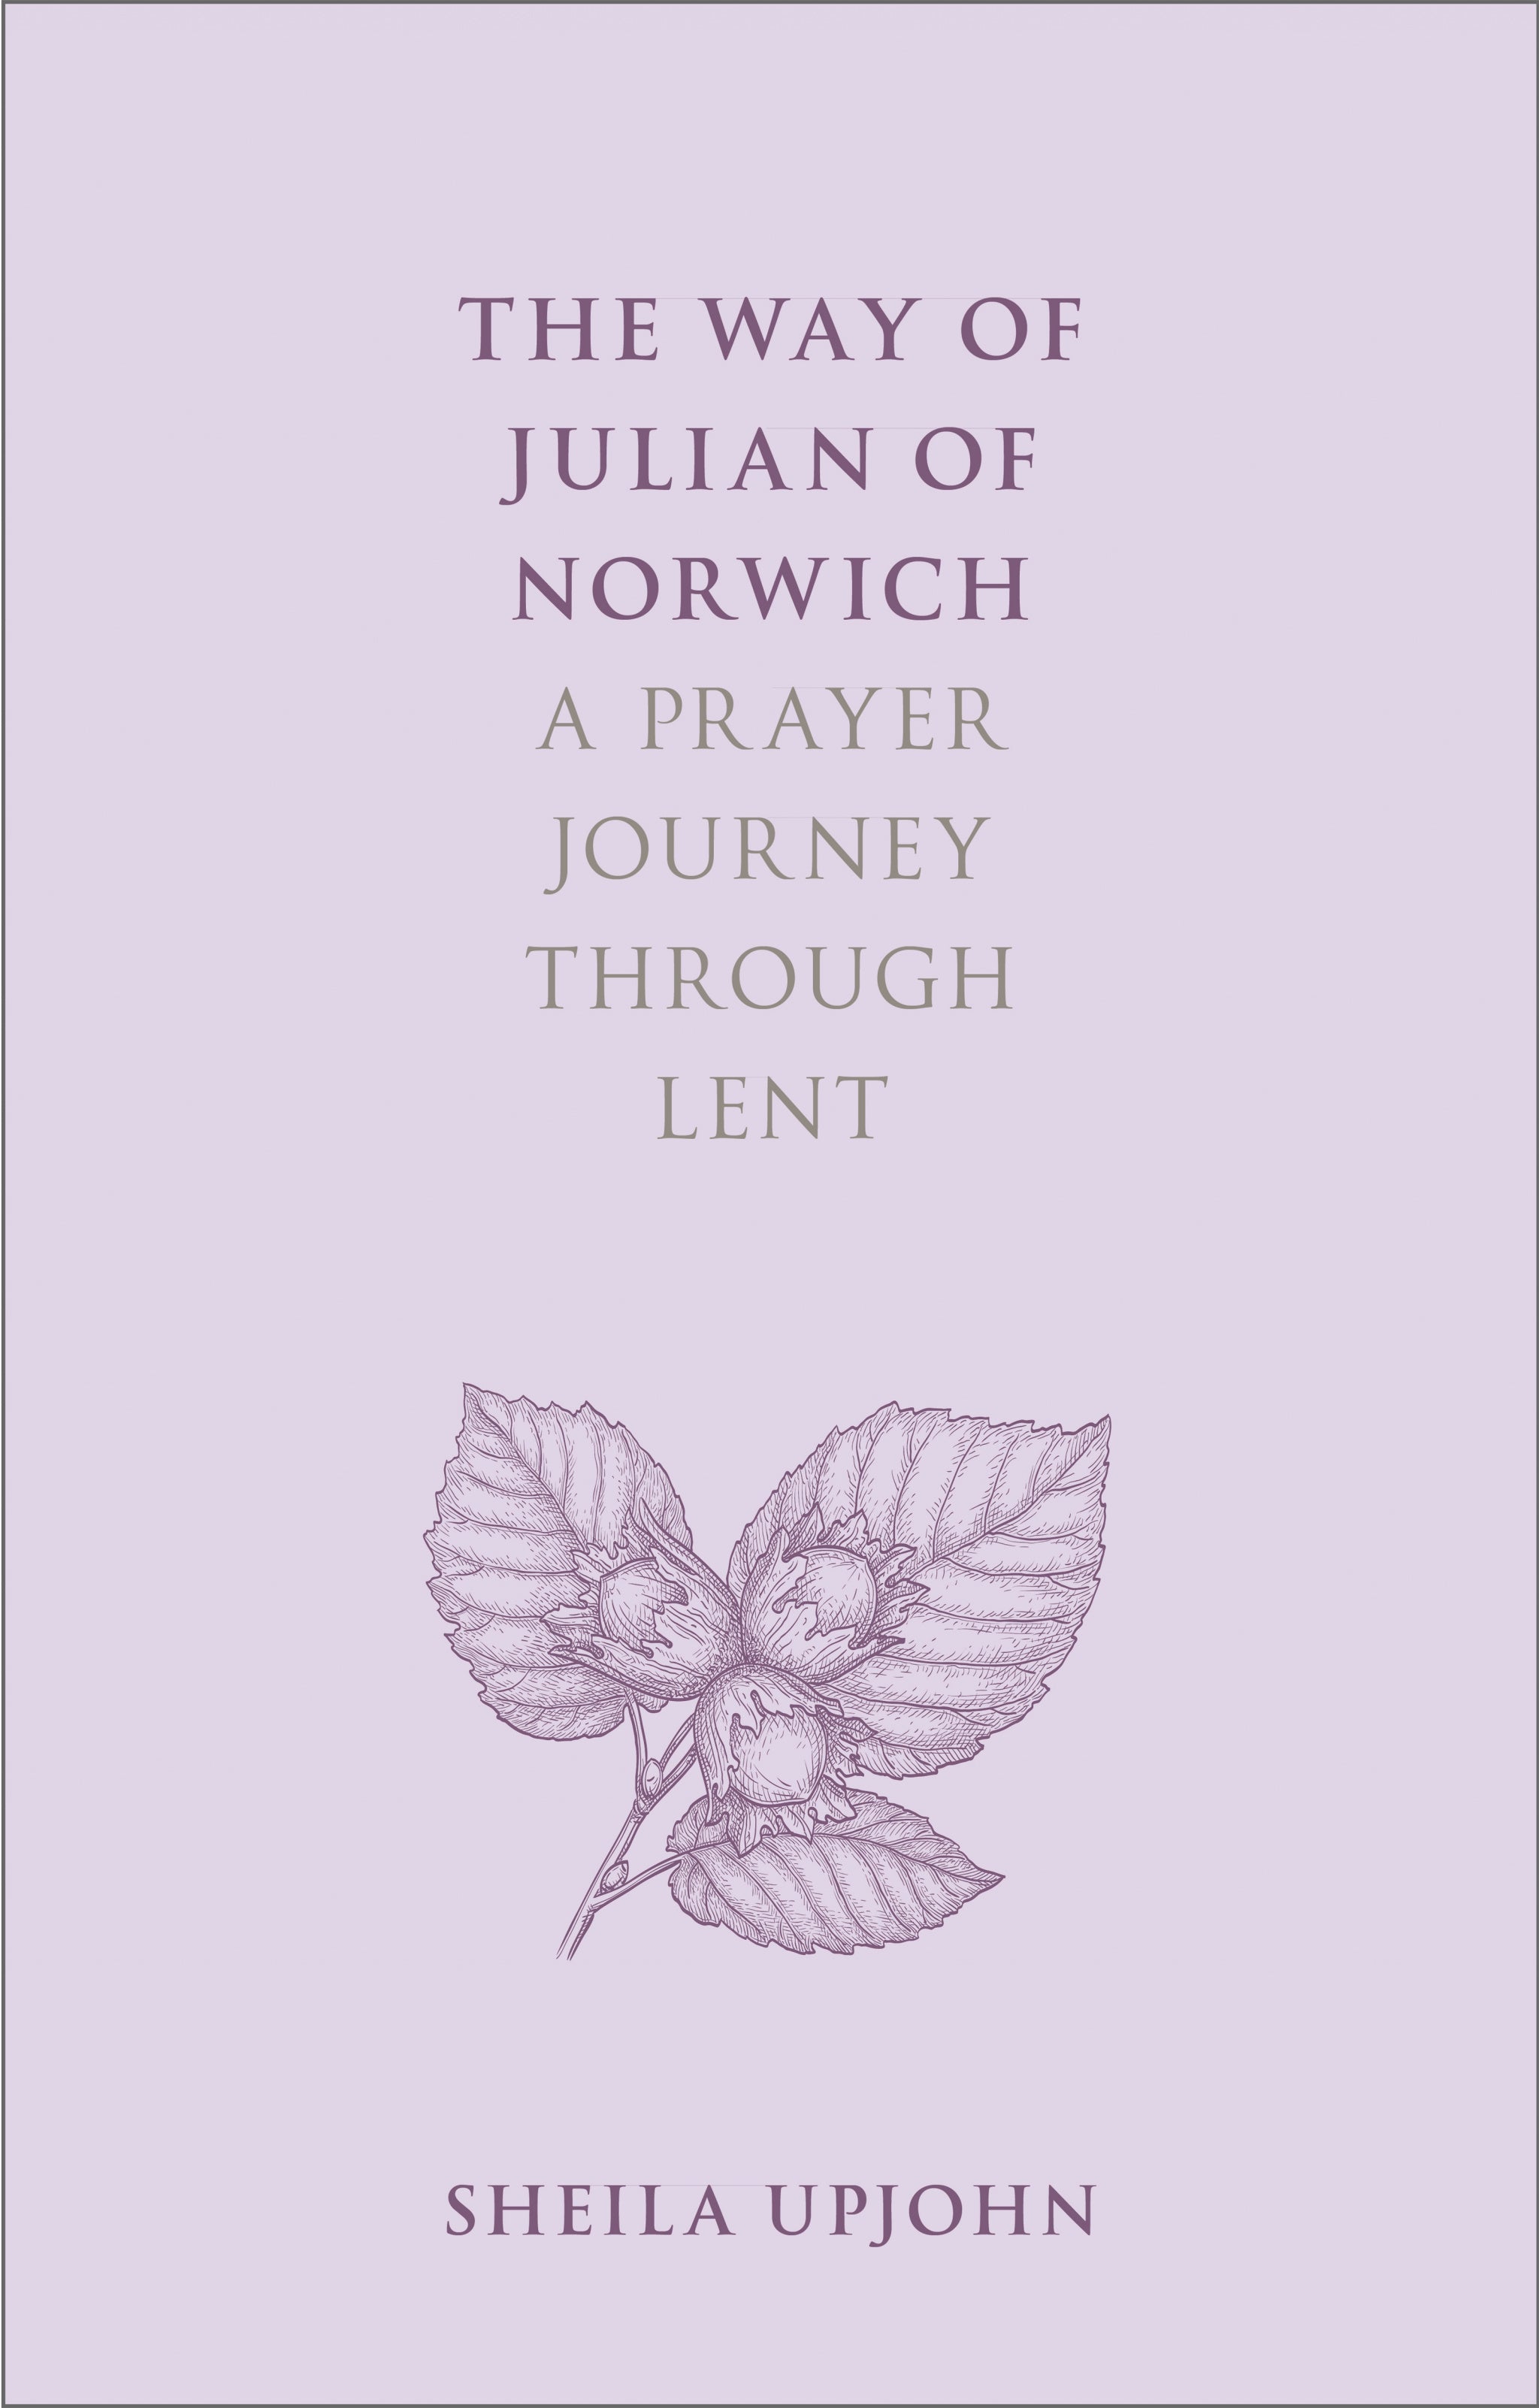 Image of The Way of Julian of Norwich other